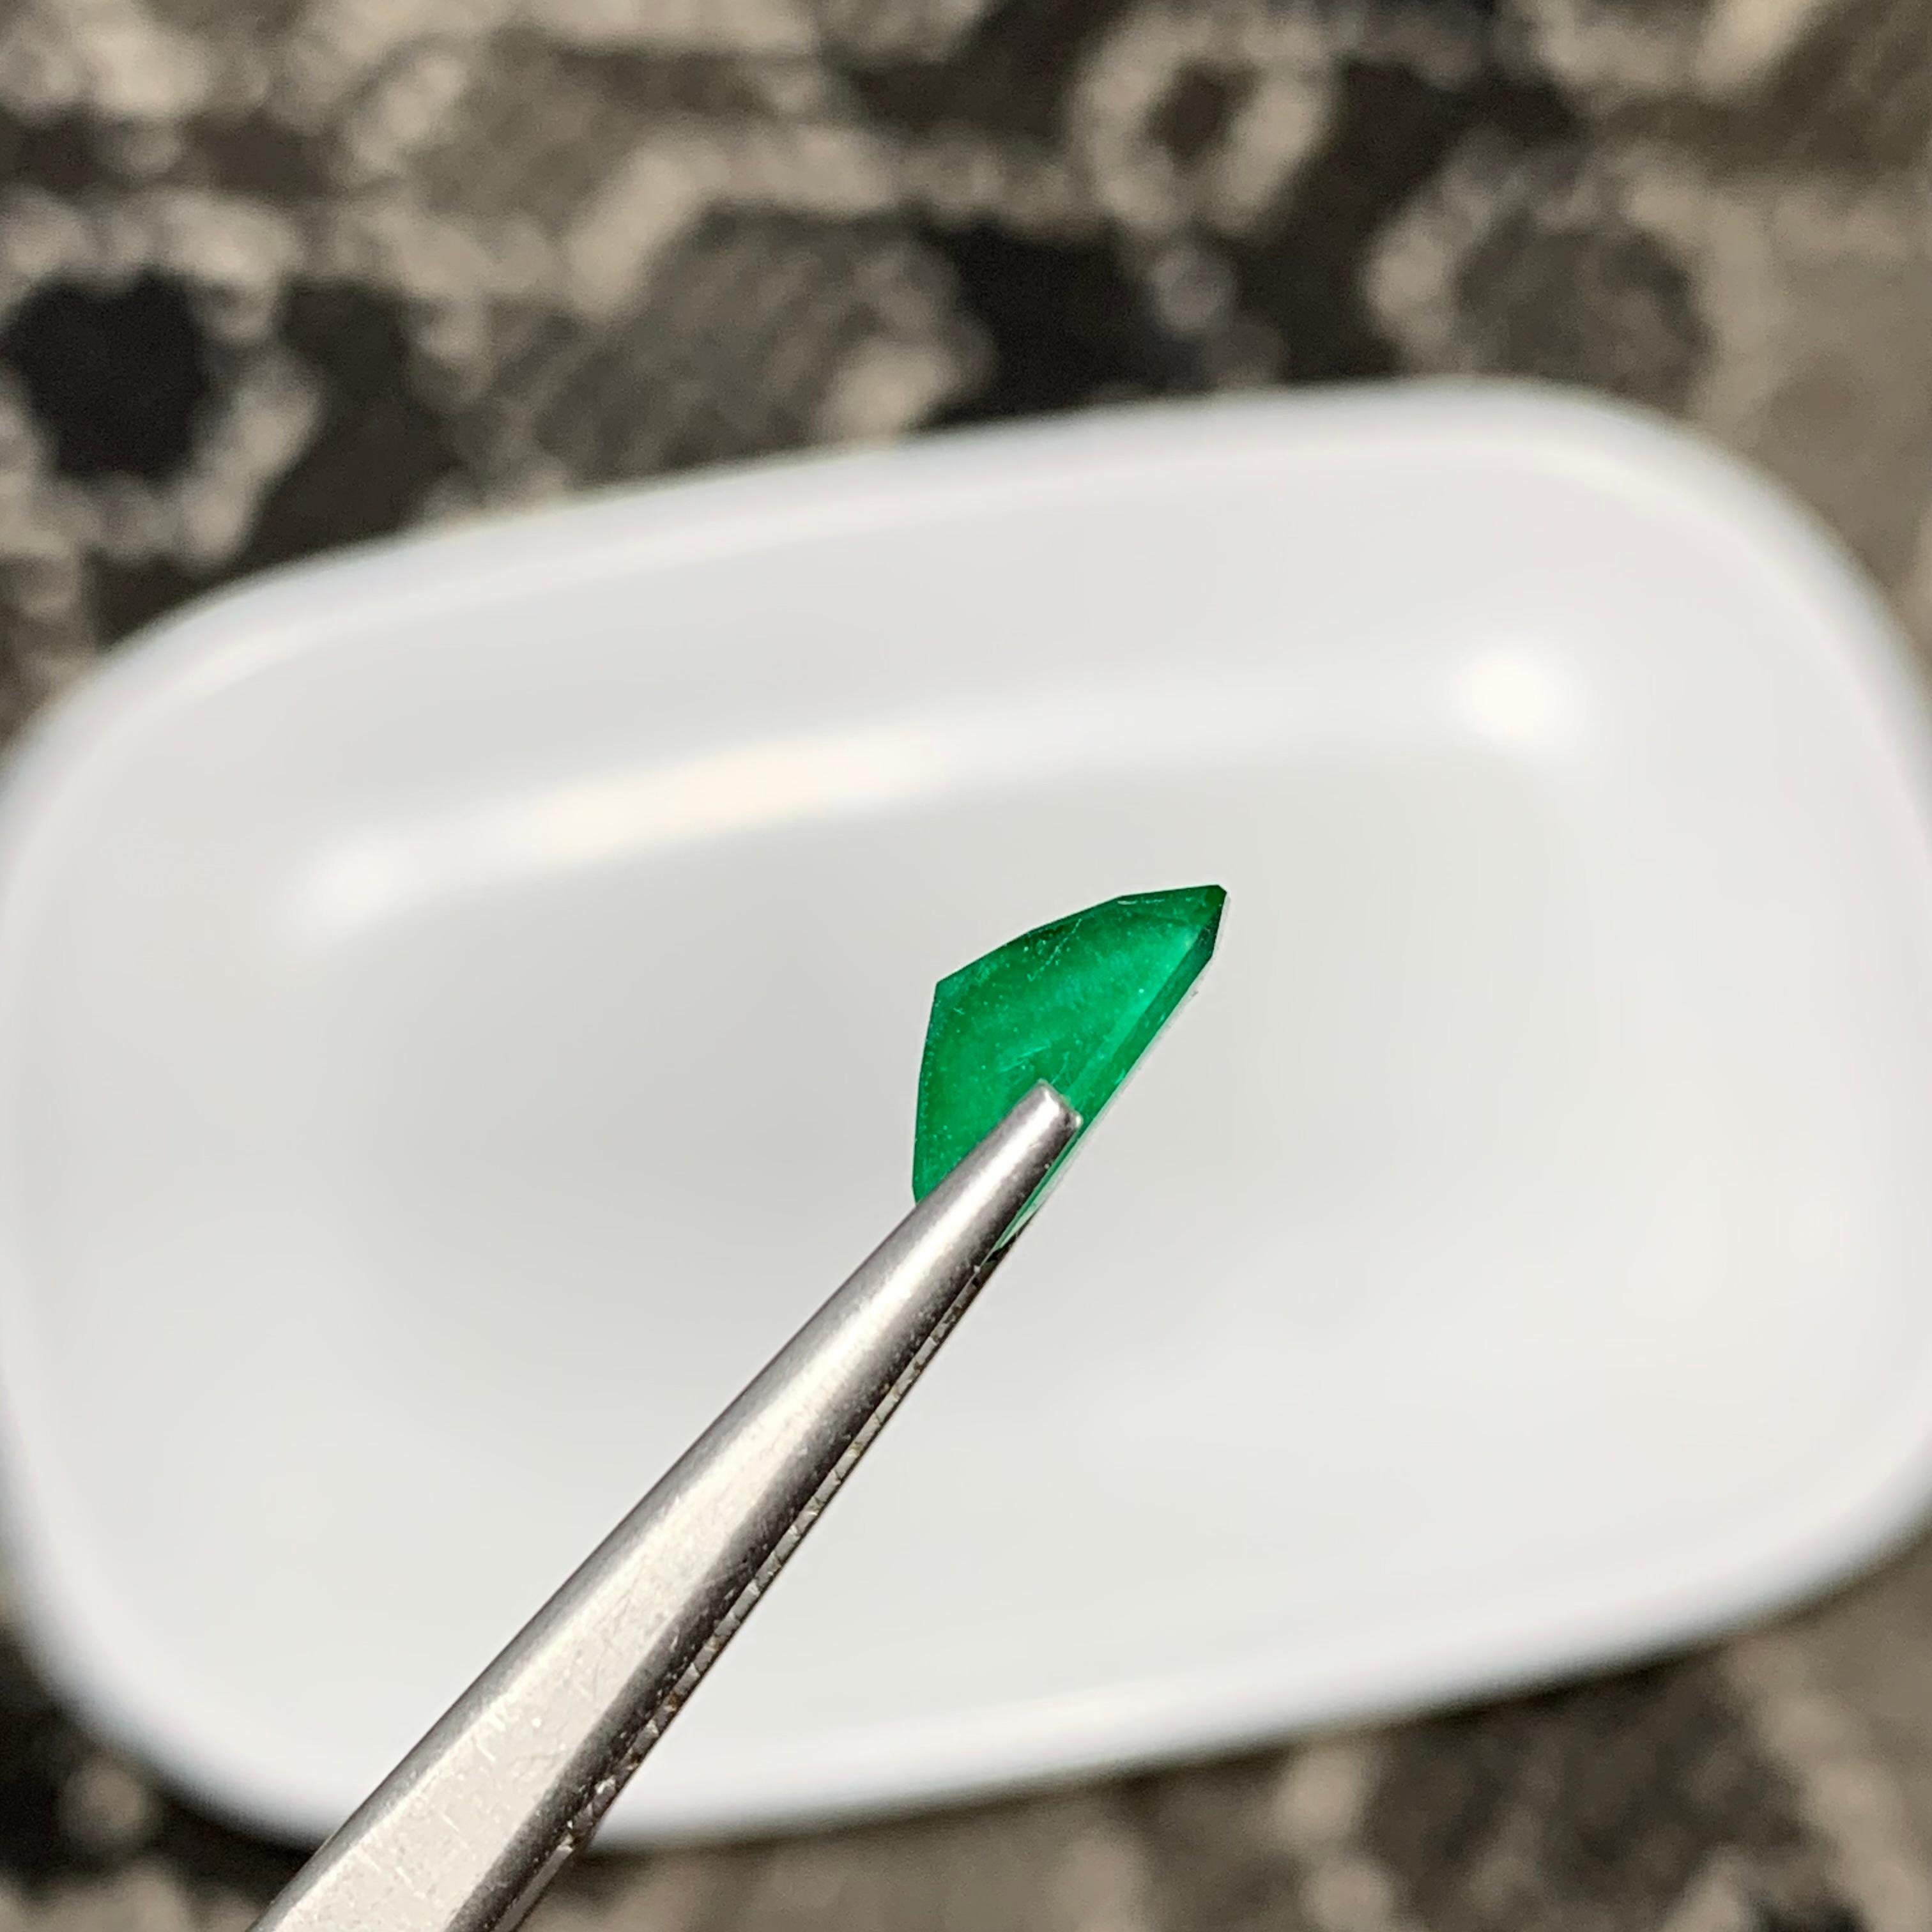 Loose Emerald
Weight: 2.50 Carats
Dimensions: 10.1 x 7.5 x 4.5 Mm
Origin: Swat Pakistan
Shape: Emerald
Color: Green
Treatment: Non
Certificate: On Demand

The Swat Emerald, also known as the Mingora Emerald, is a rare and highly prized gemstone